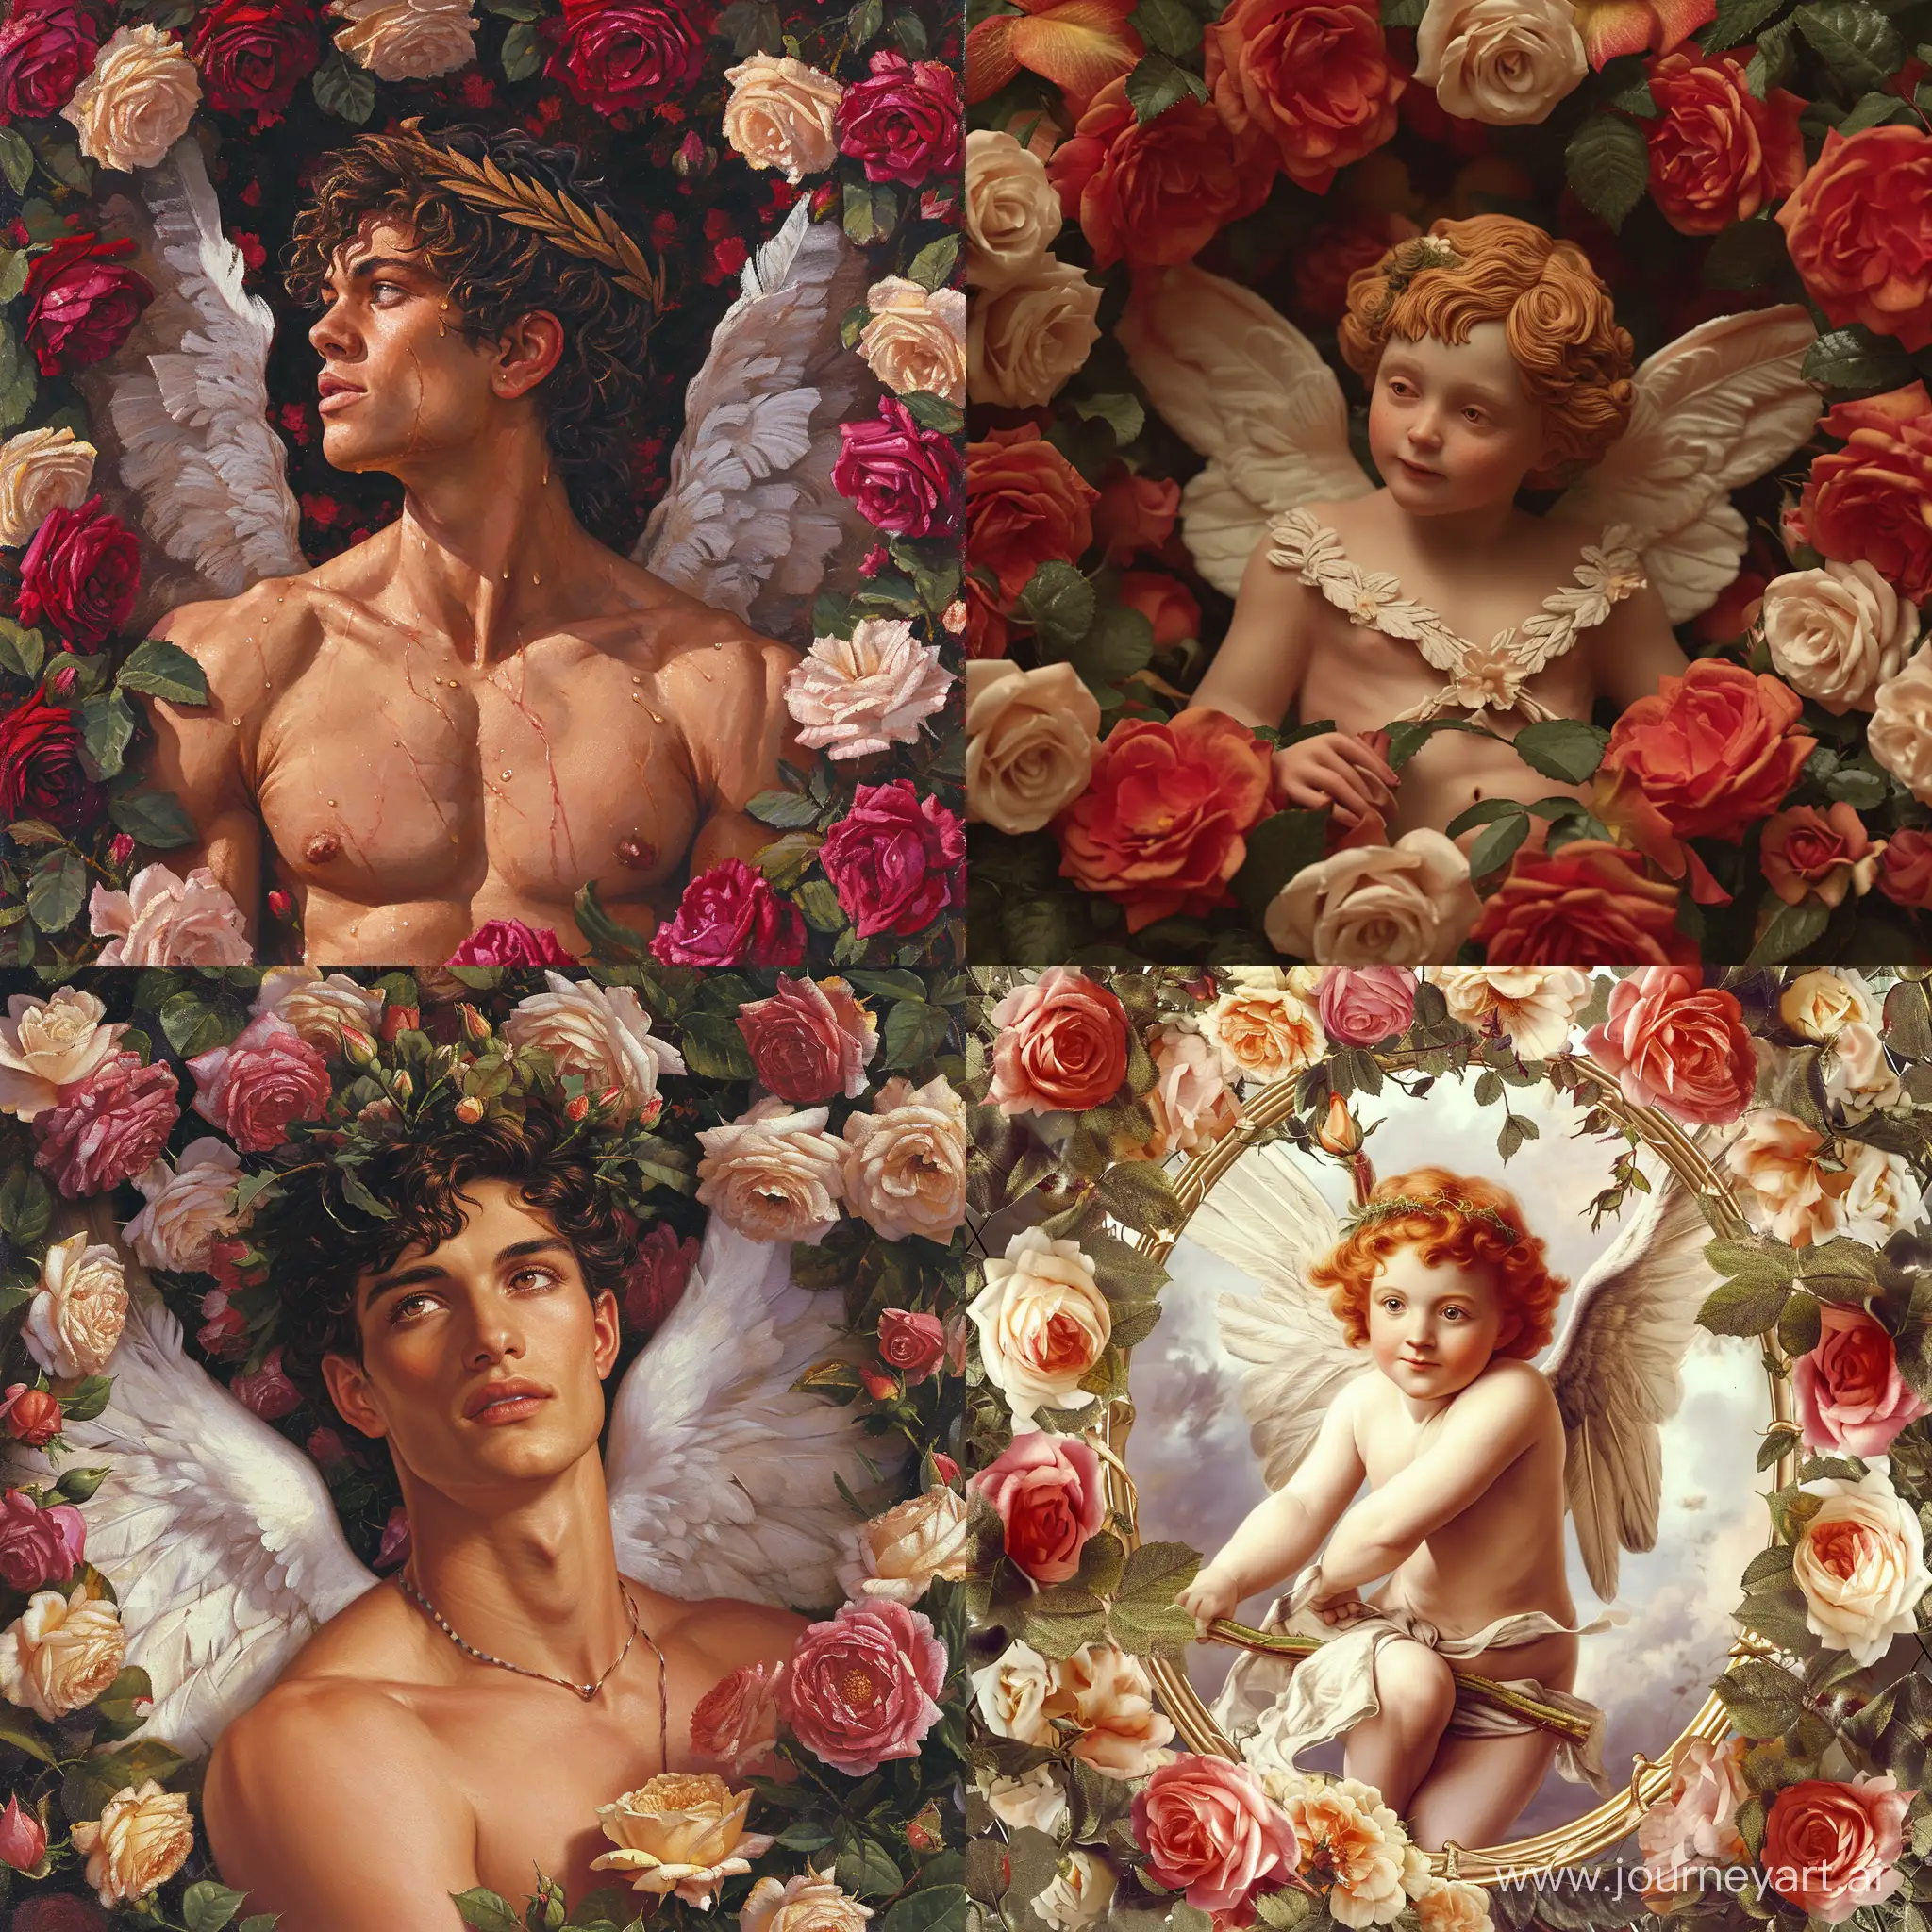 Handsome adult Cupid surrounded by roses